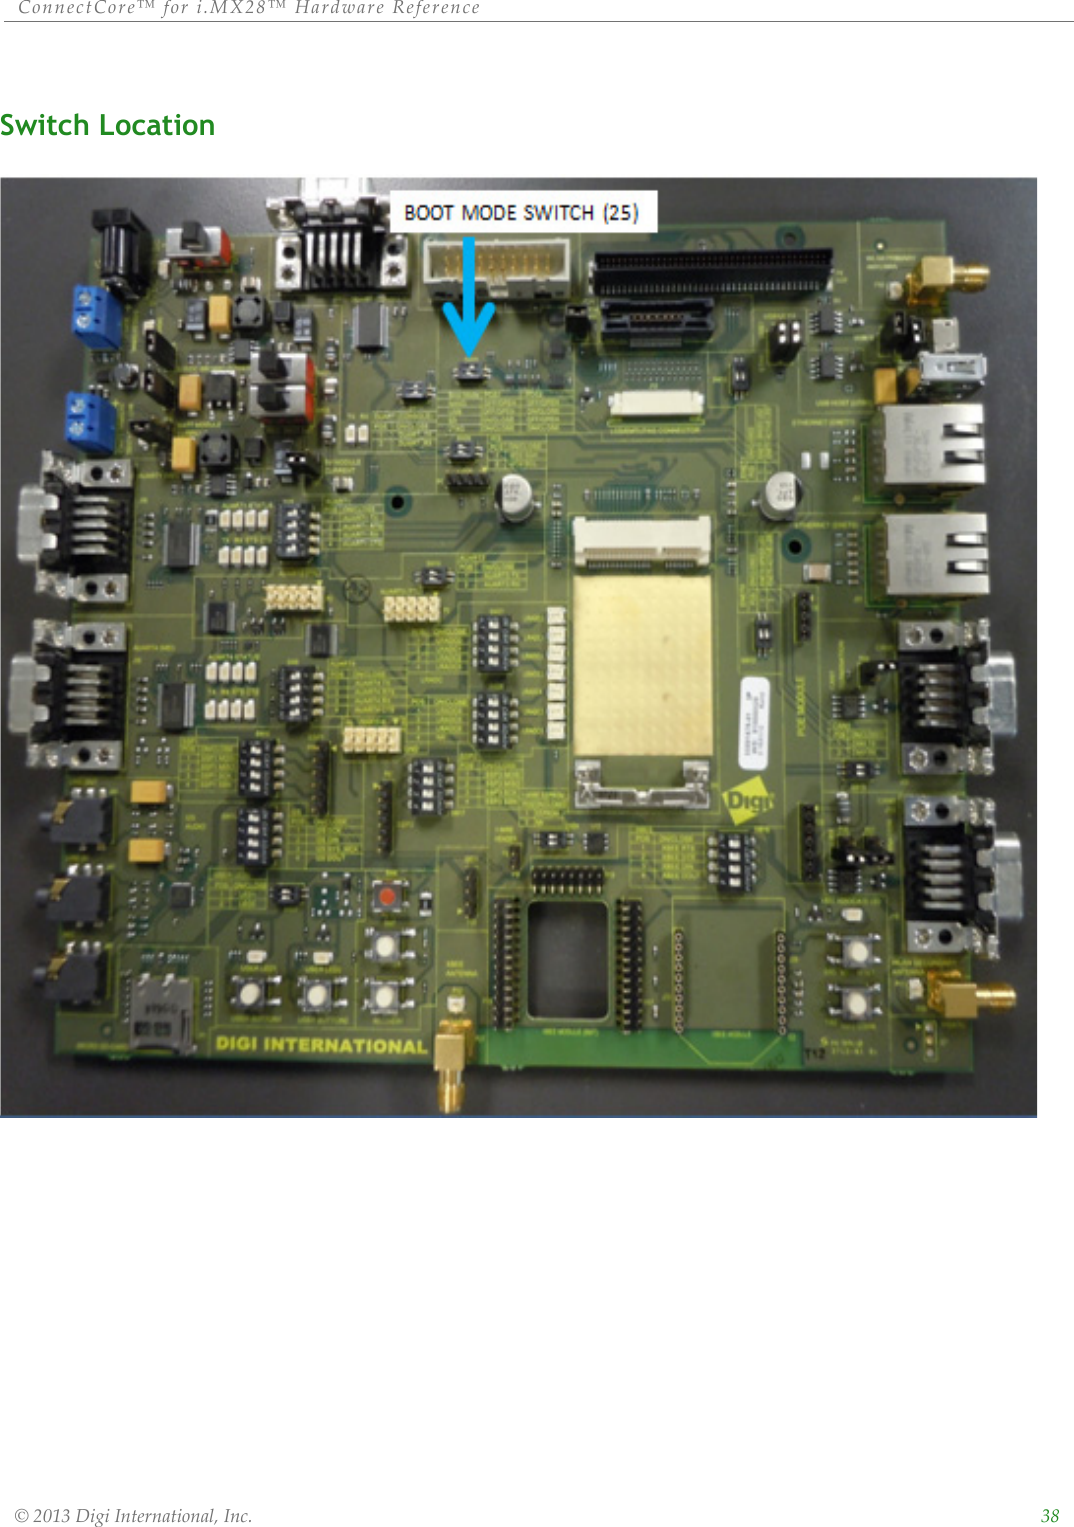 ConnectCore™ for i.MX28™ Hardware Reference  © 2013 Digi International, Inc.    38Switch Location